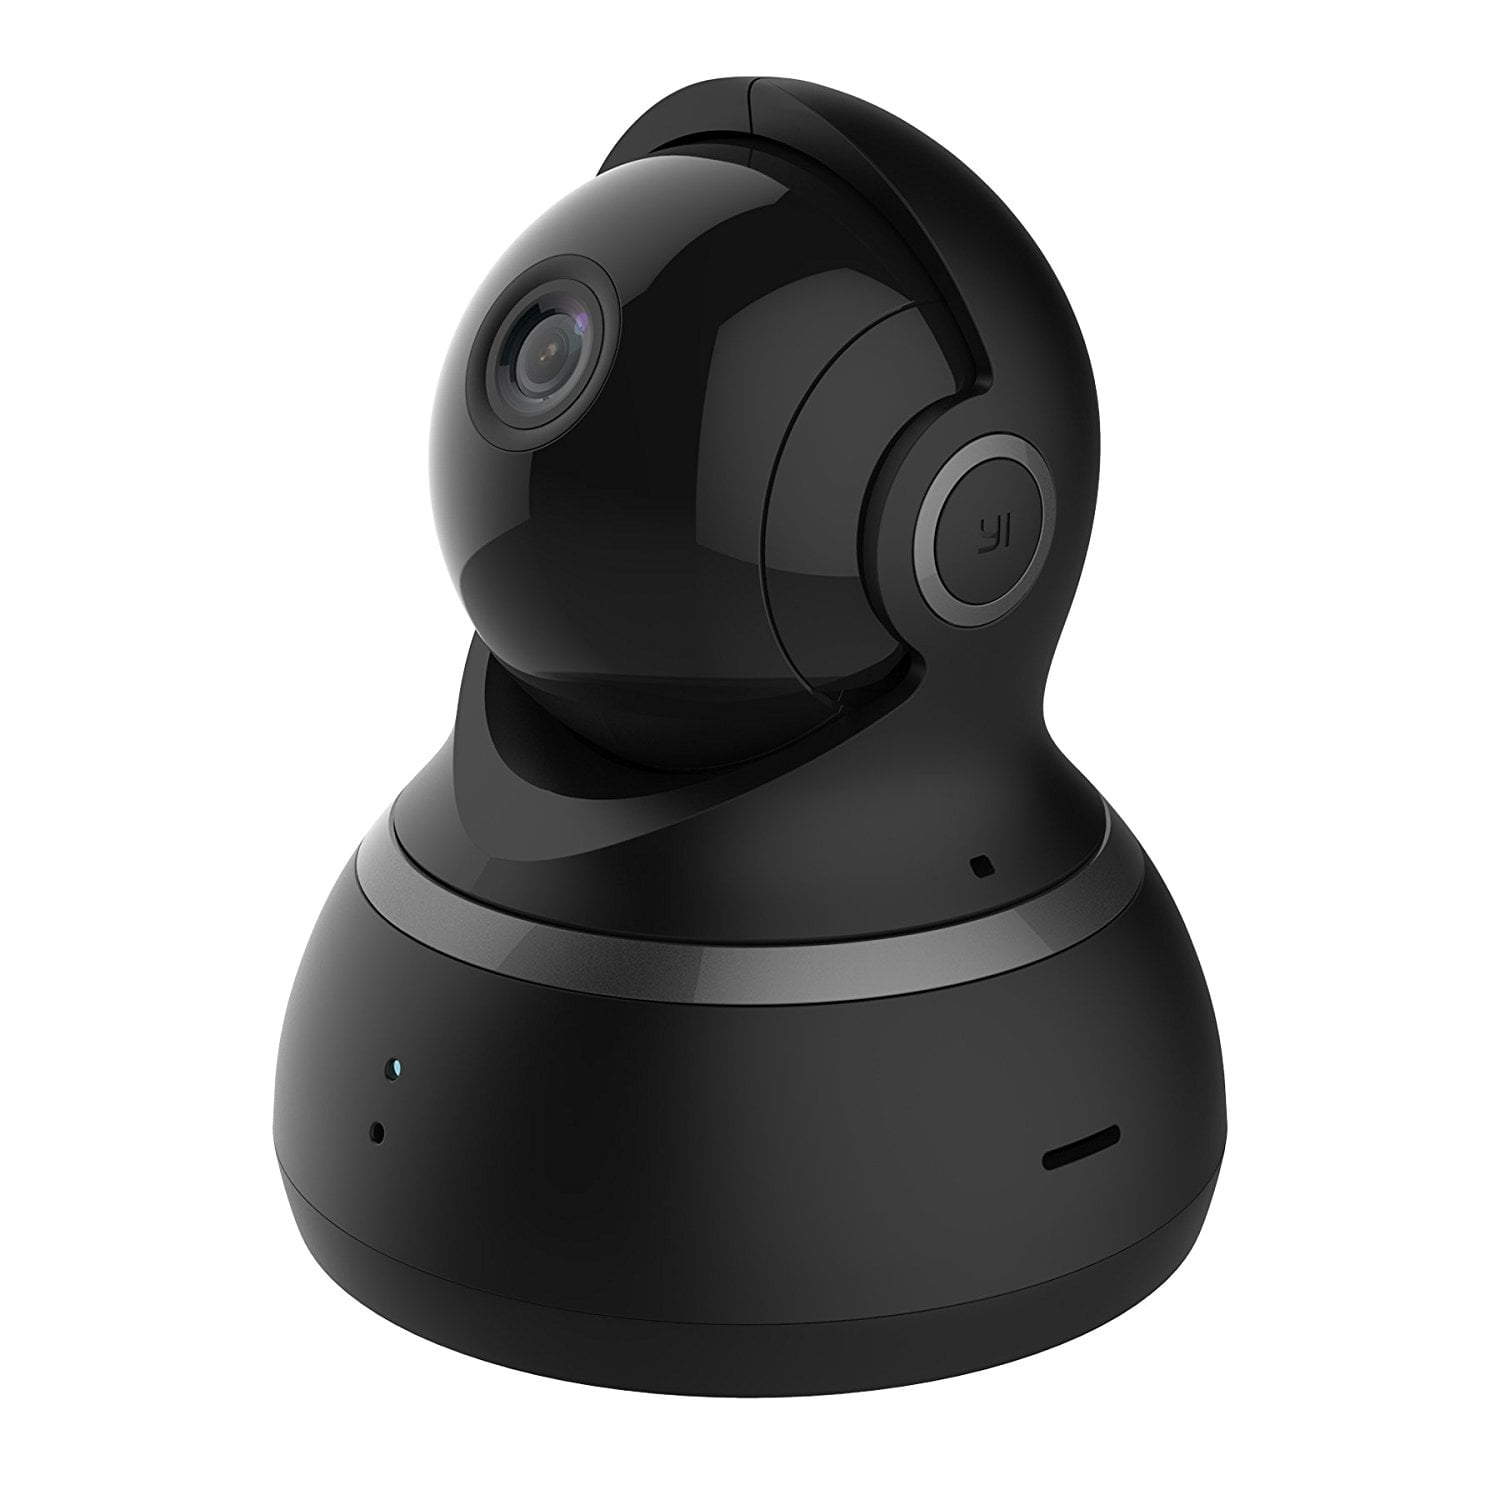 yi dome camera security issues